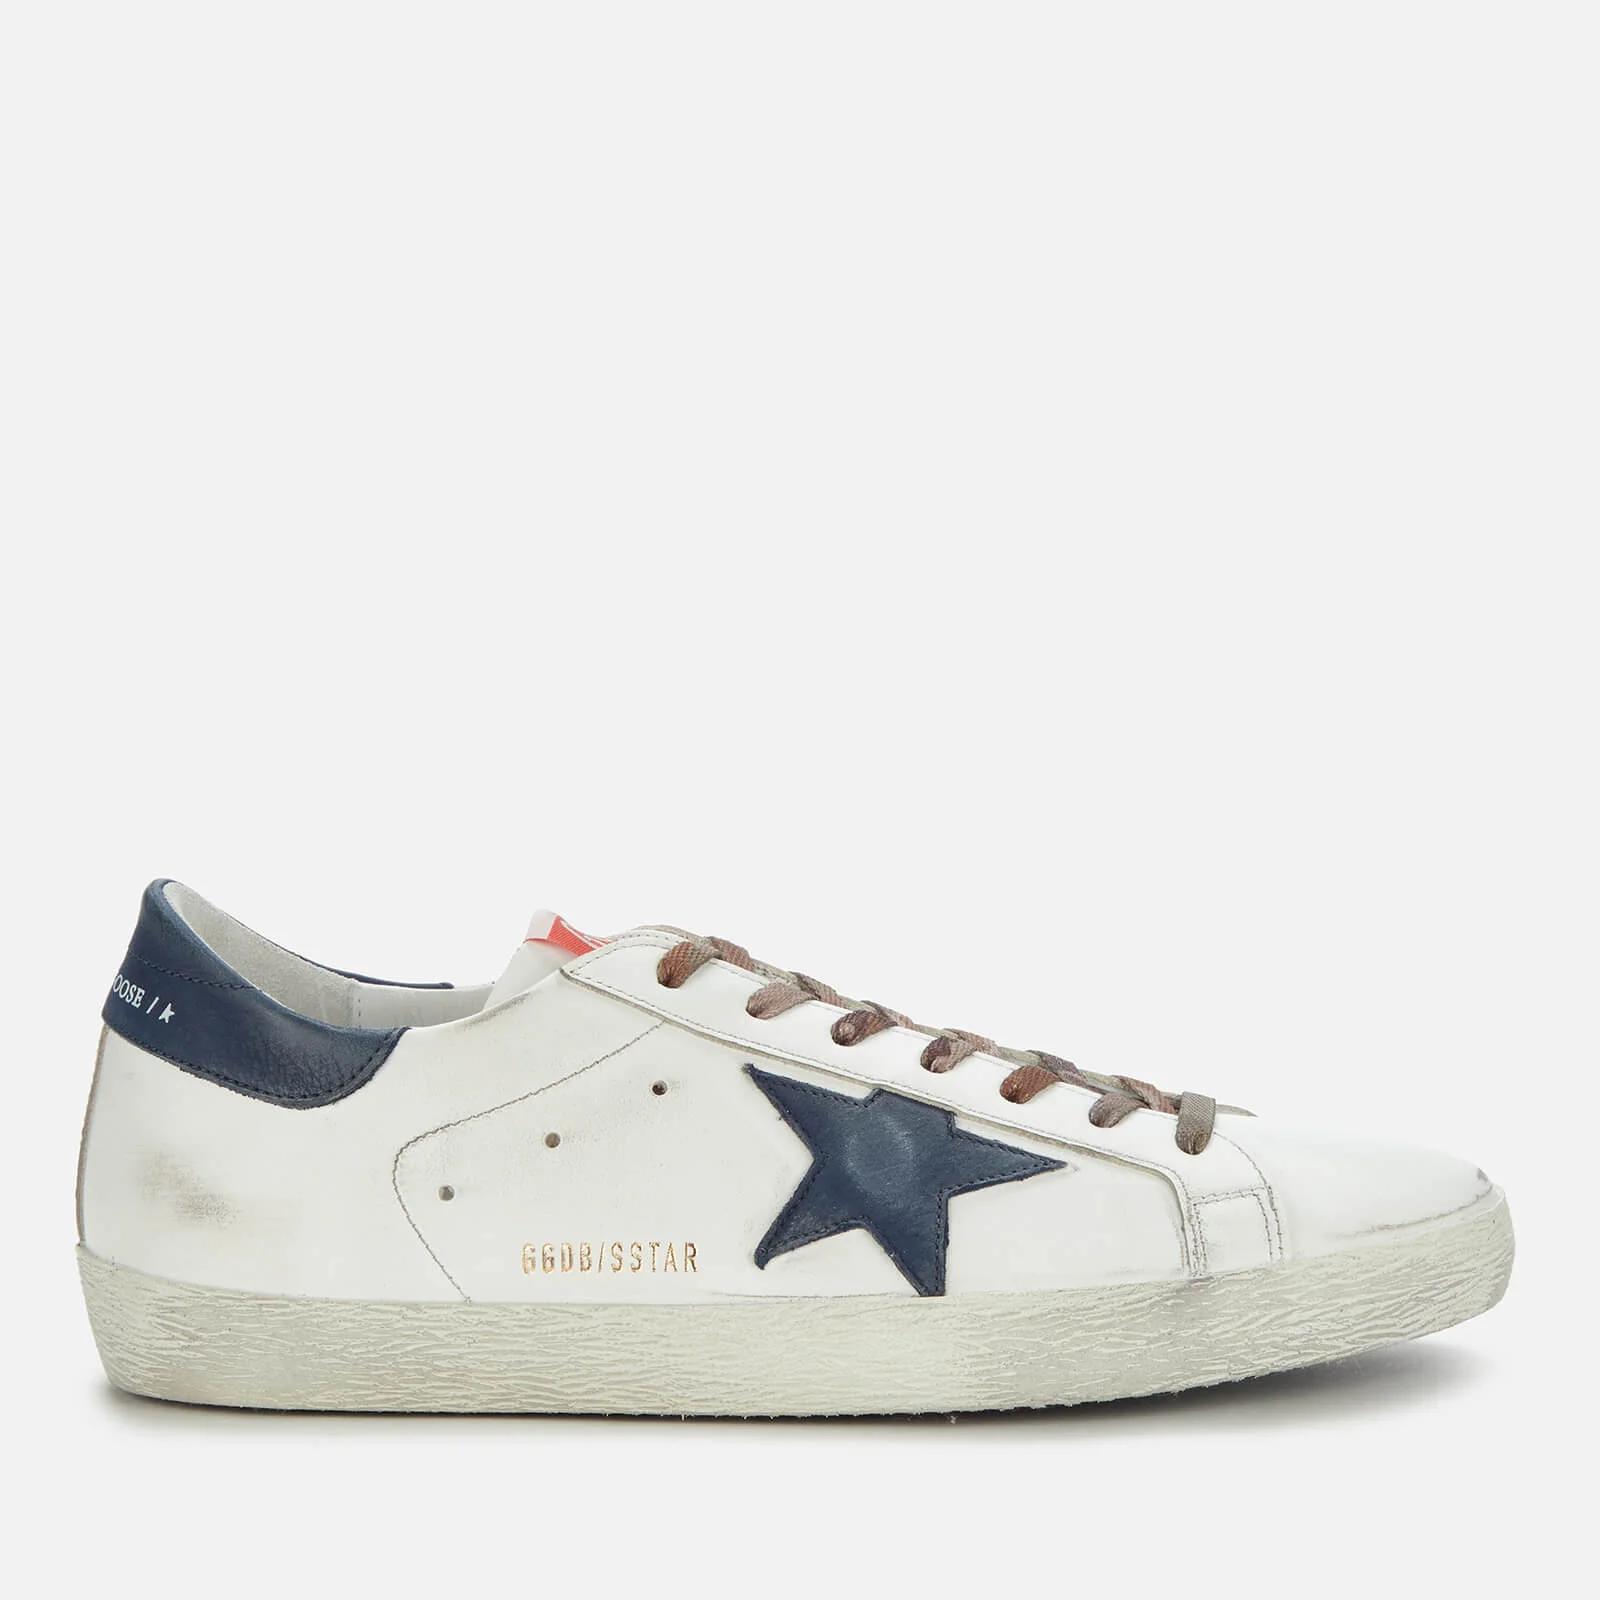 Golden Goose Men's Superstar Leather Trainers - White/Night Blue Image 1